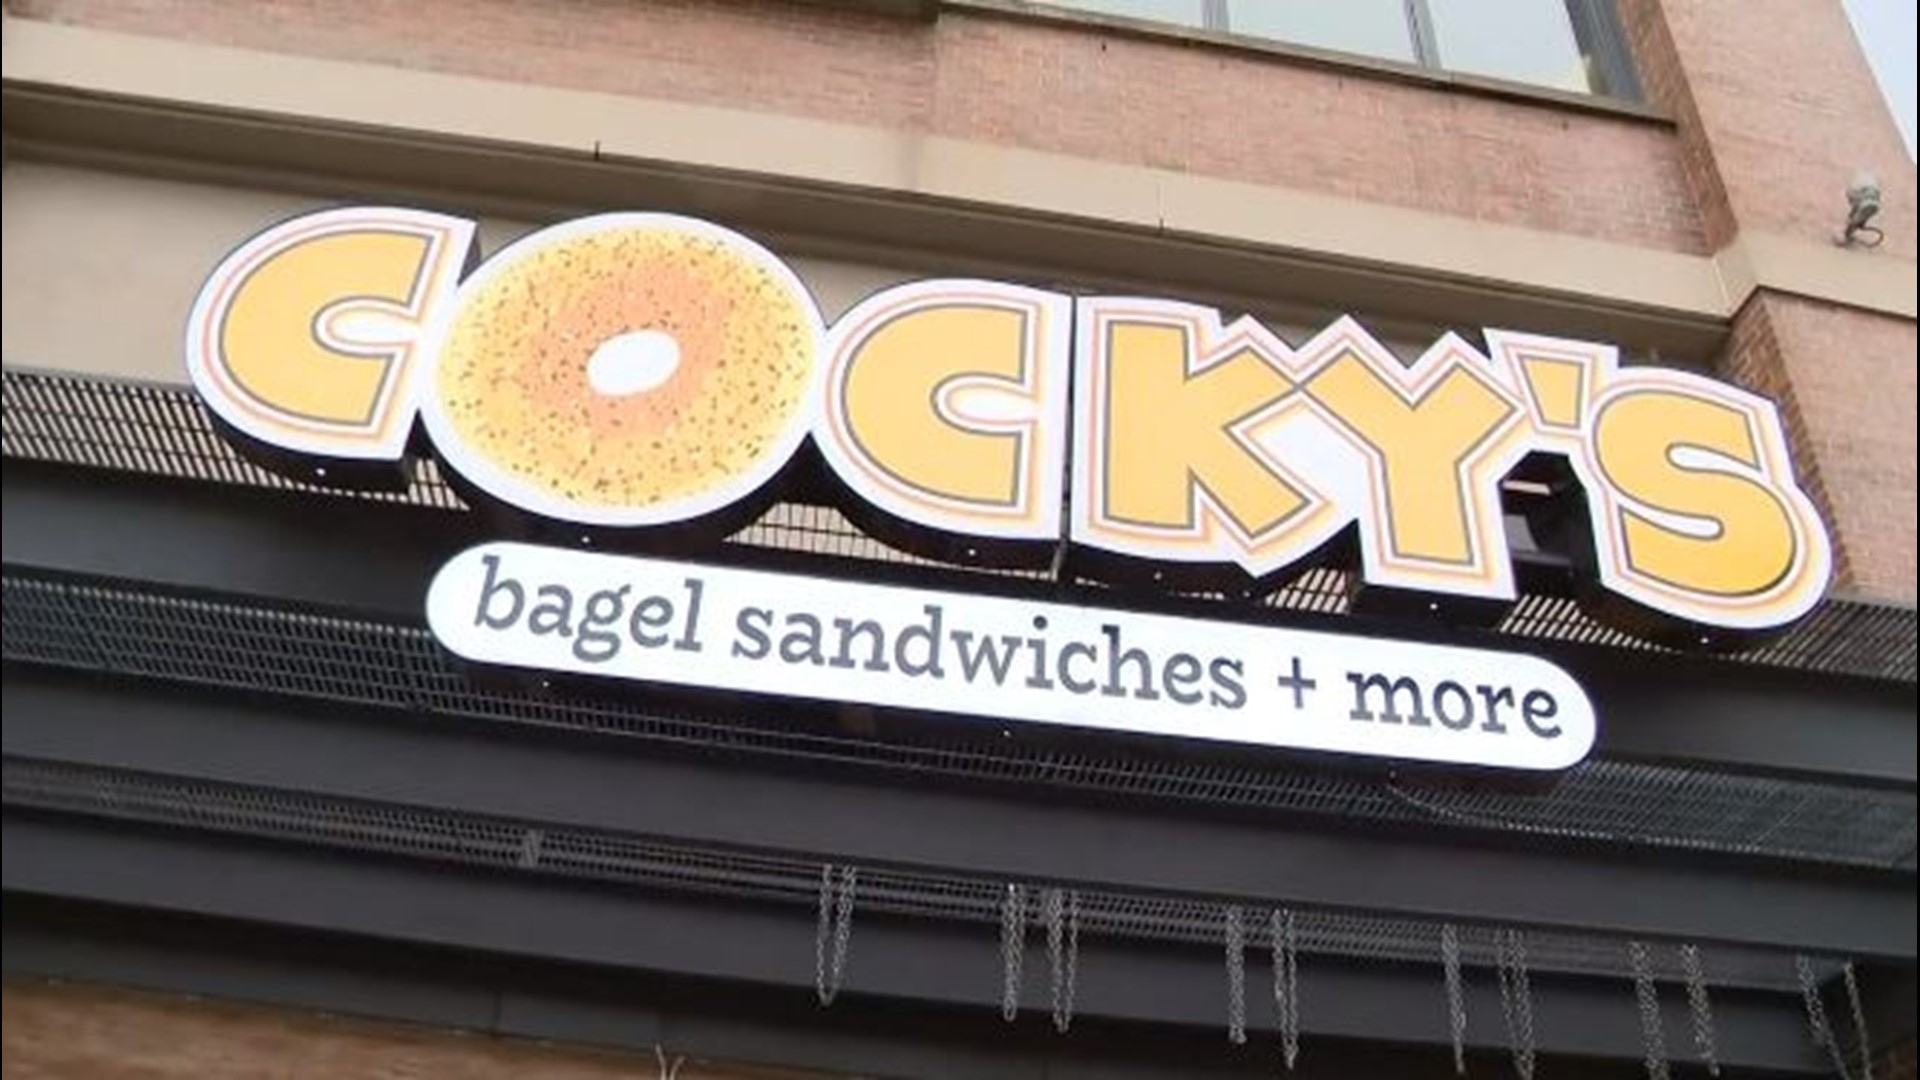 3News' Austin Love takes us behind the scenes at Cocky's Bagels in Cleveland.